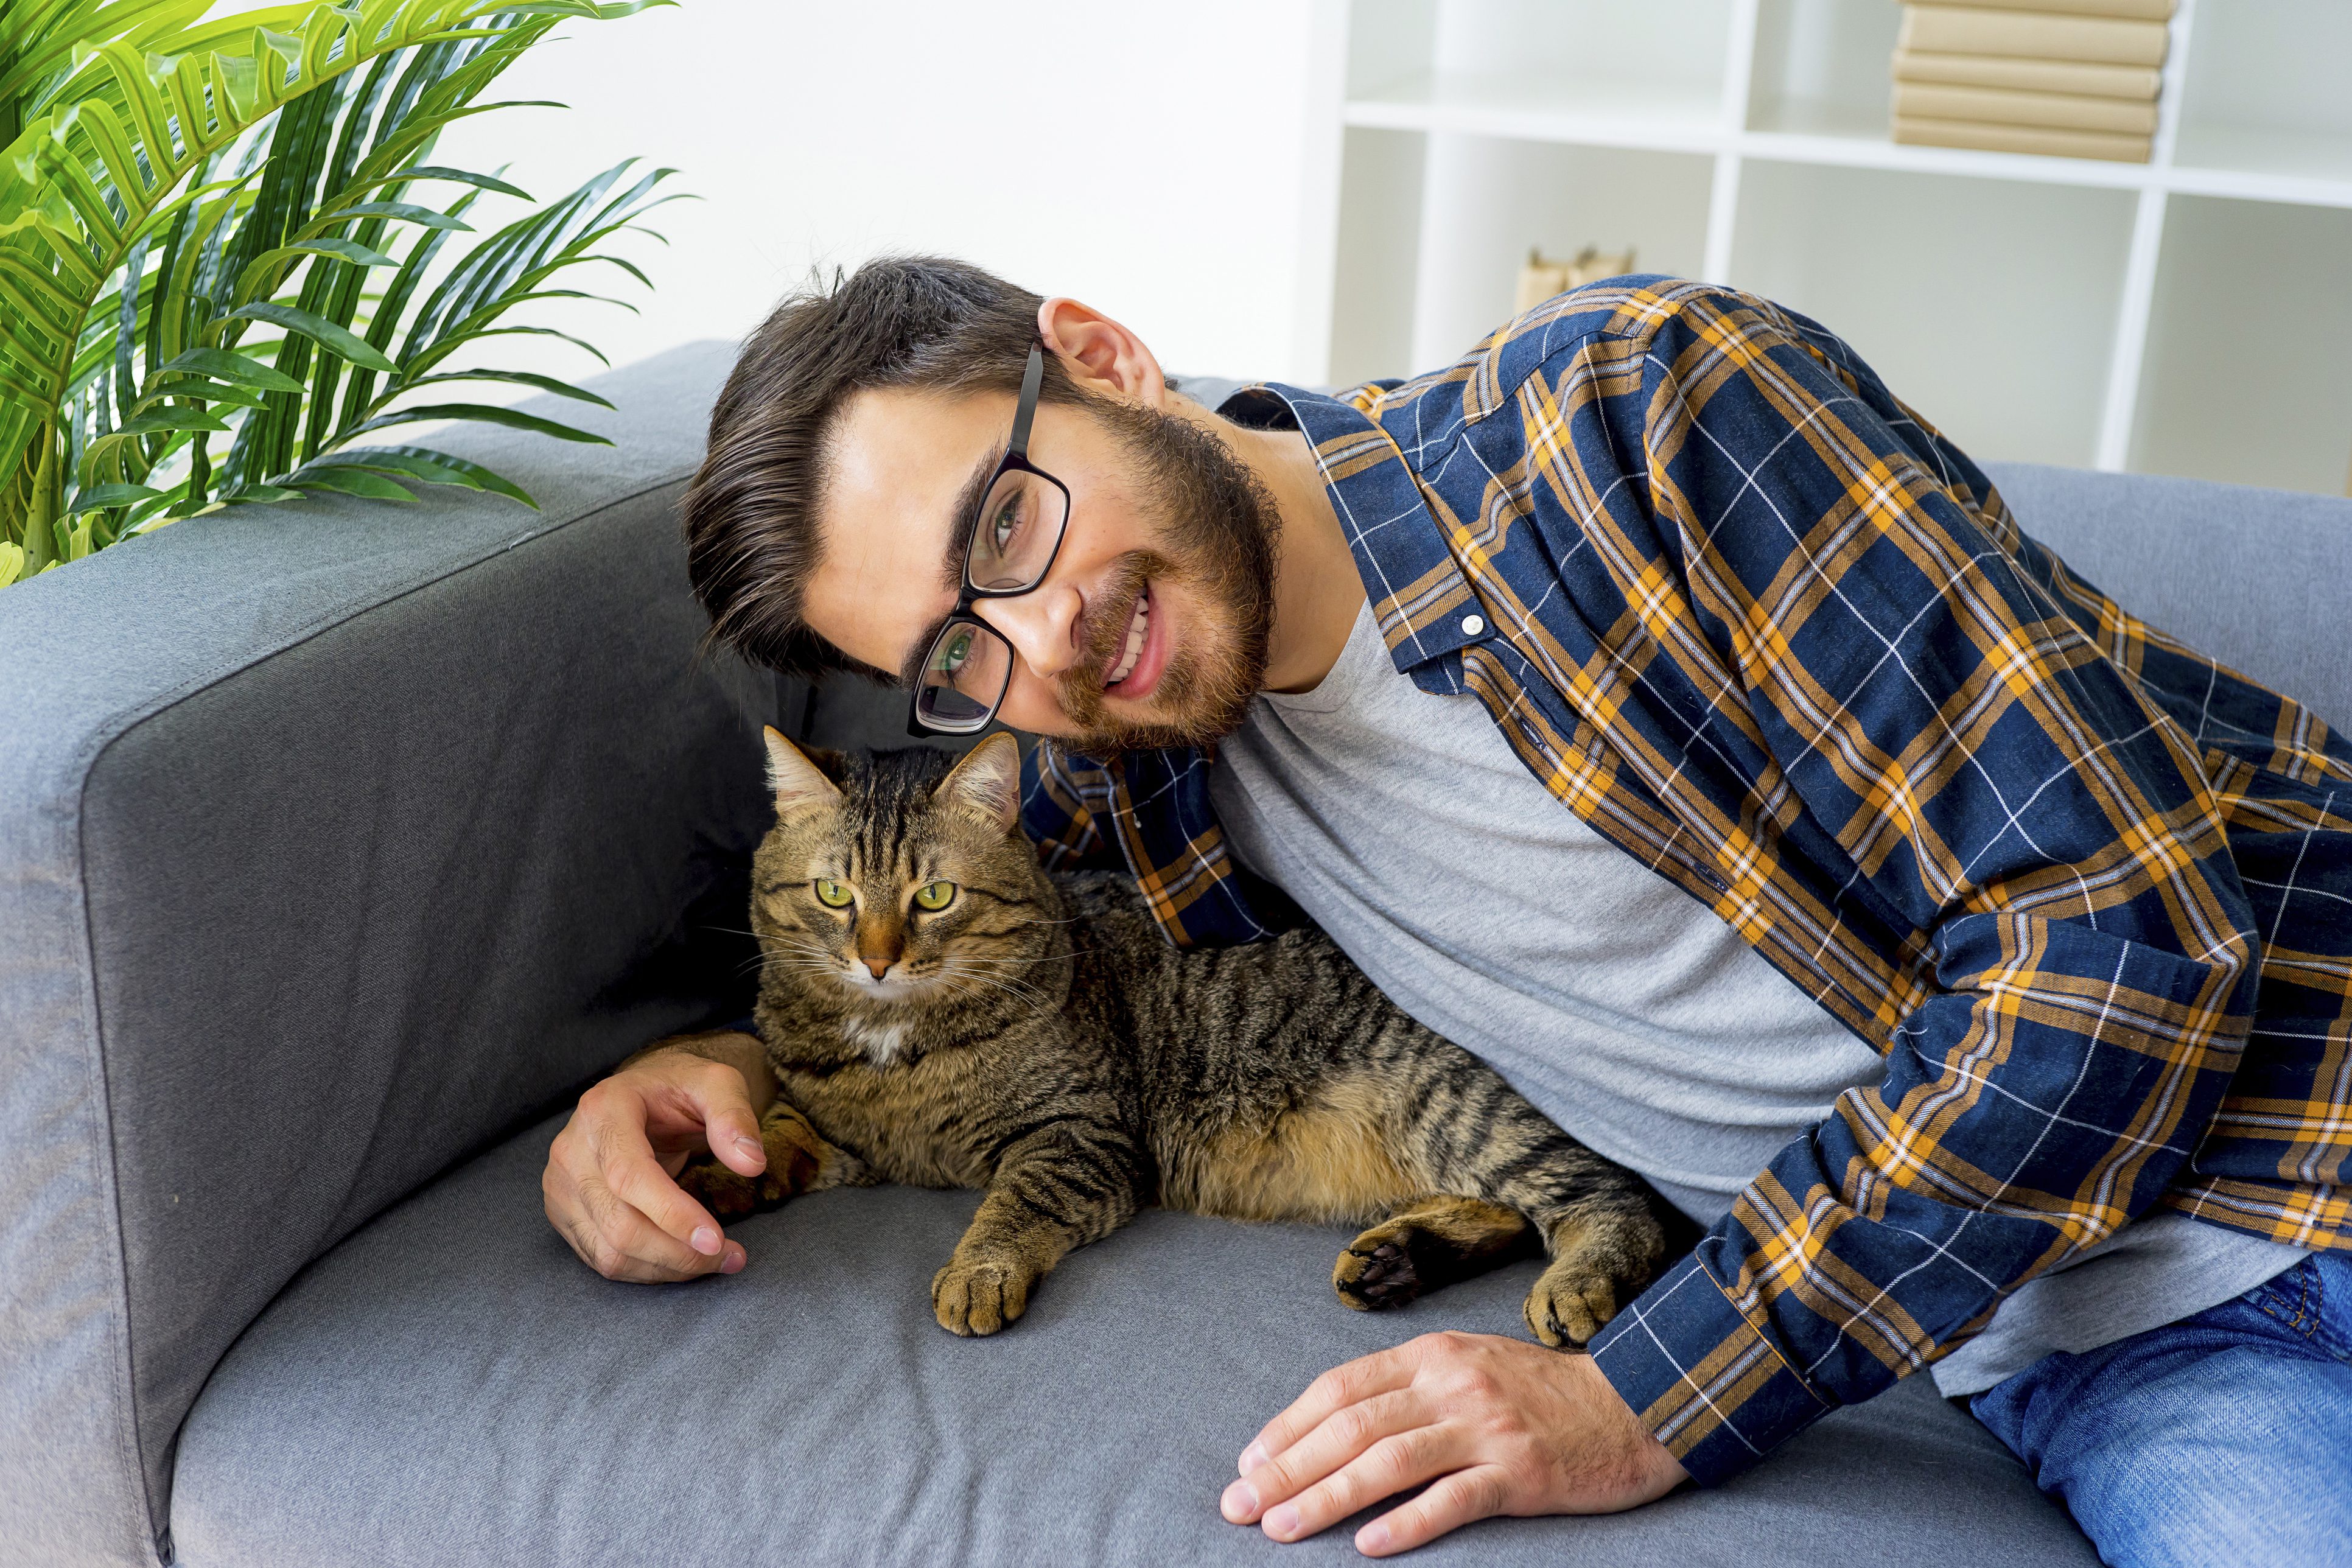 Online Dating: Women Seem More Interested In My Cat Photo Than In Me?